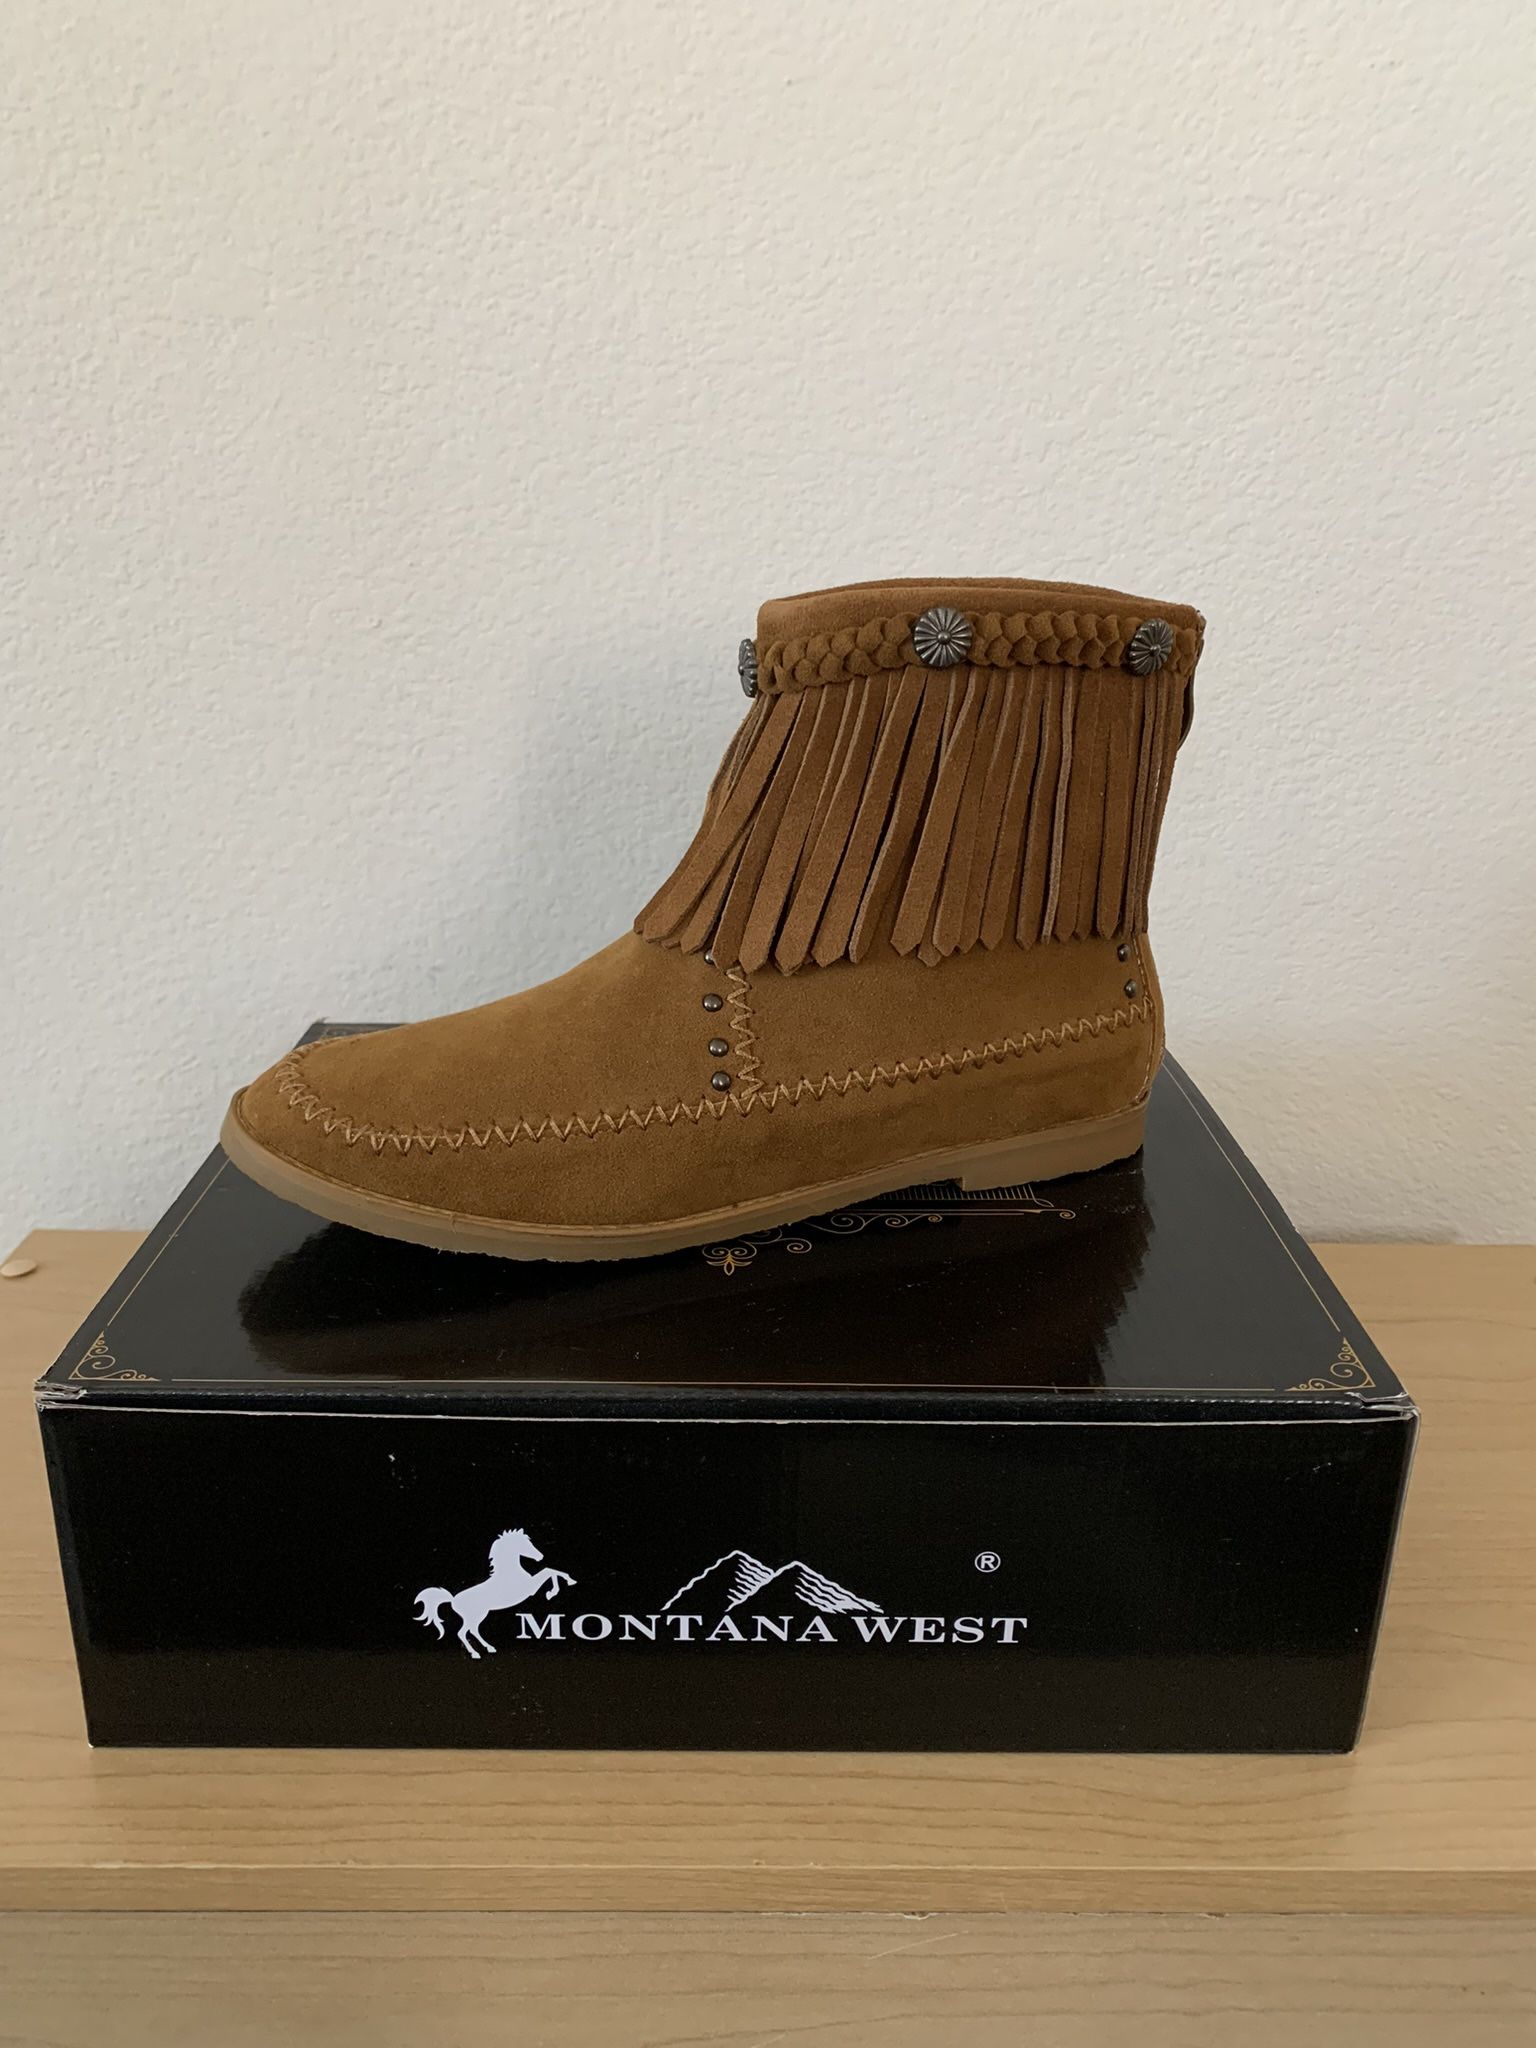 Brand New Southwest Boots - 9 Narrow - Fits like a size 8 or 7.5